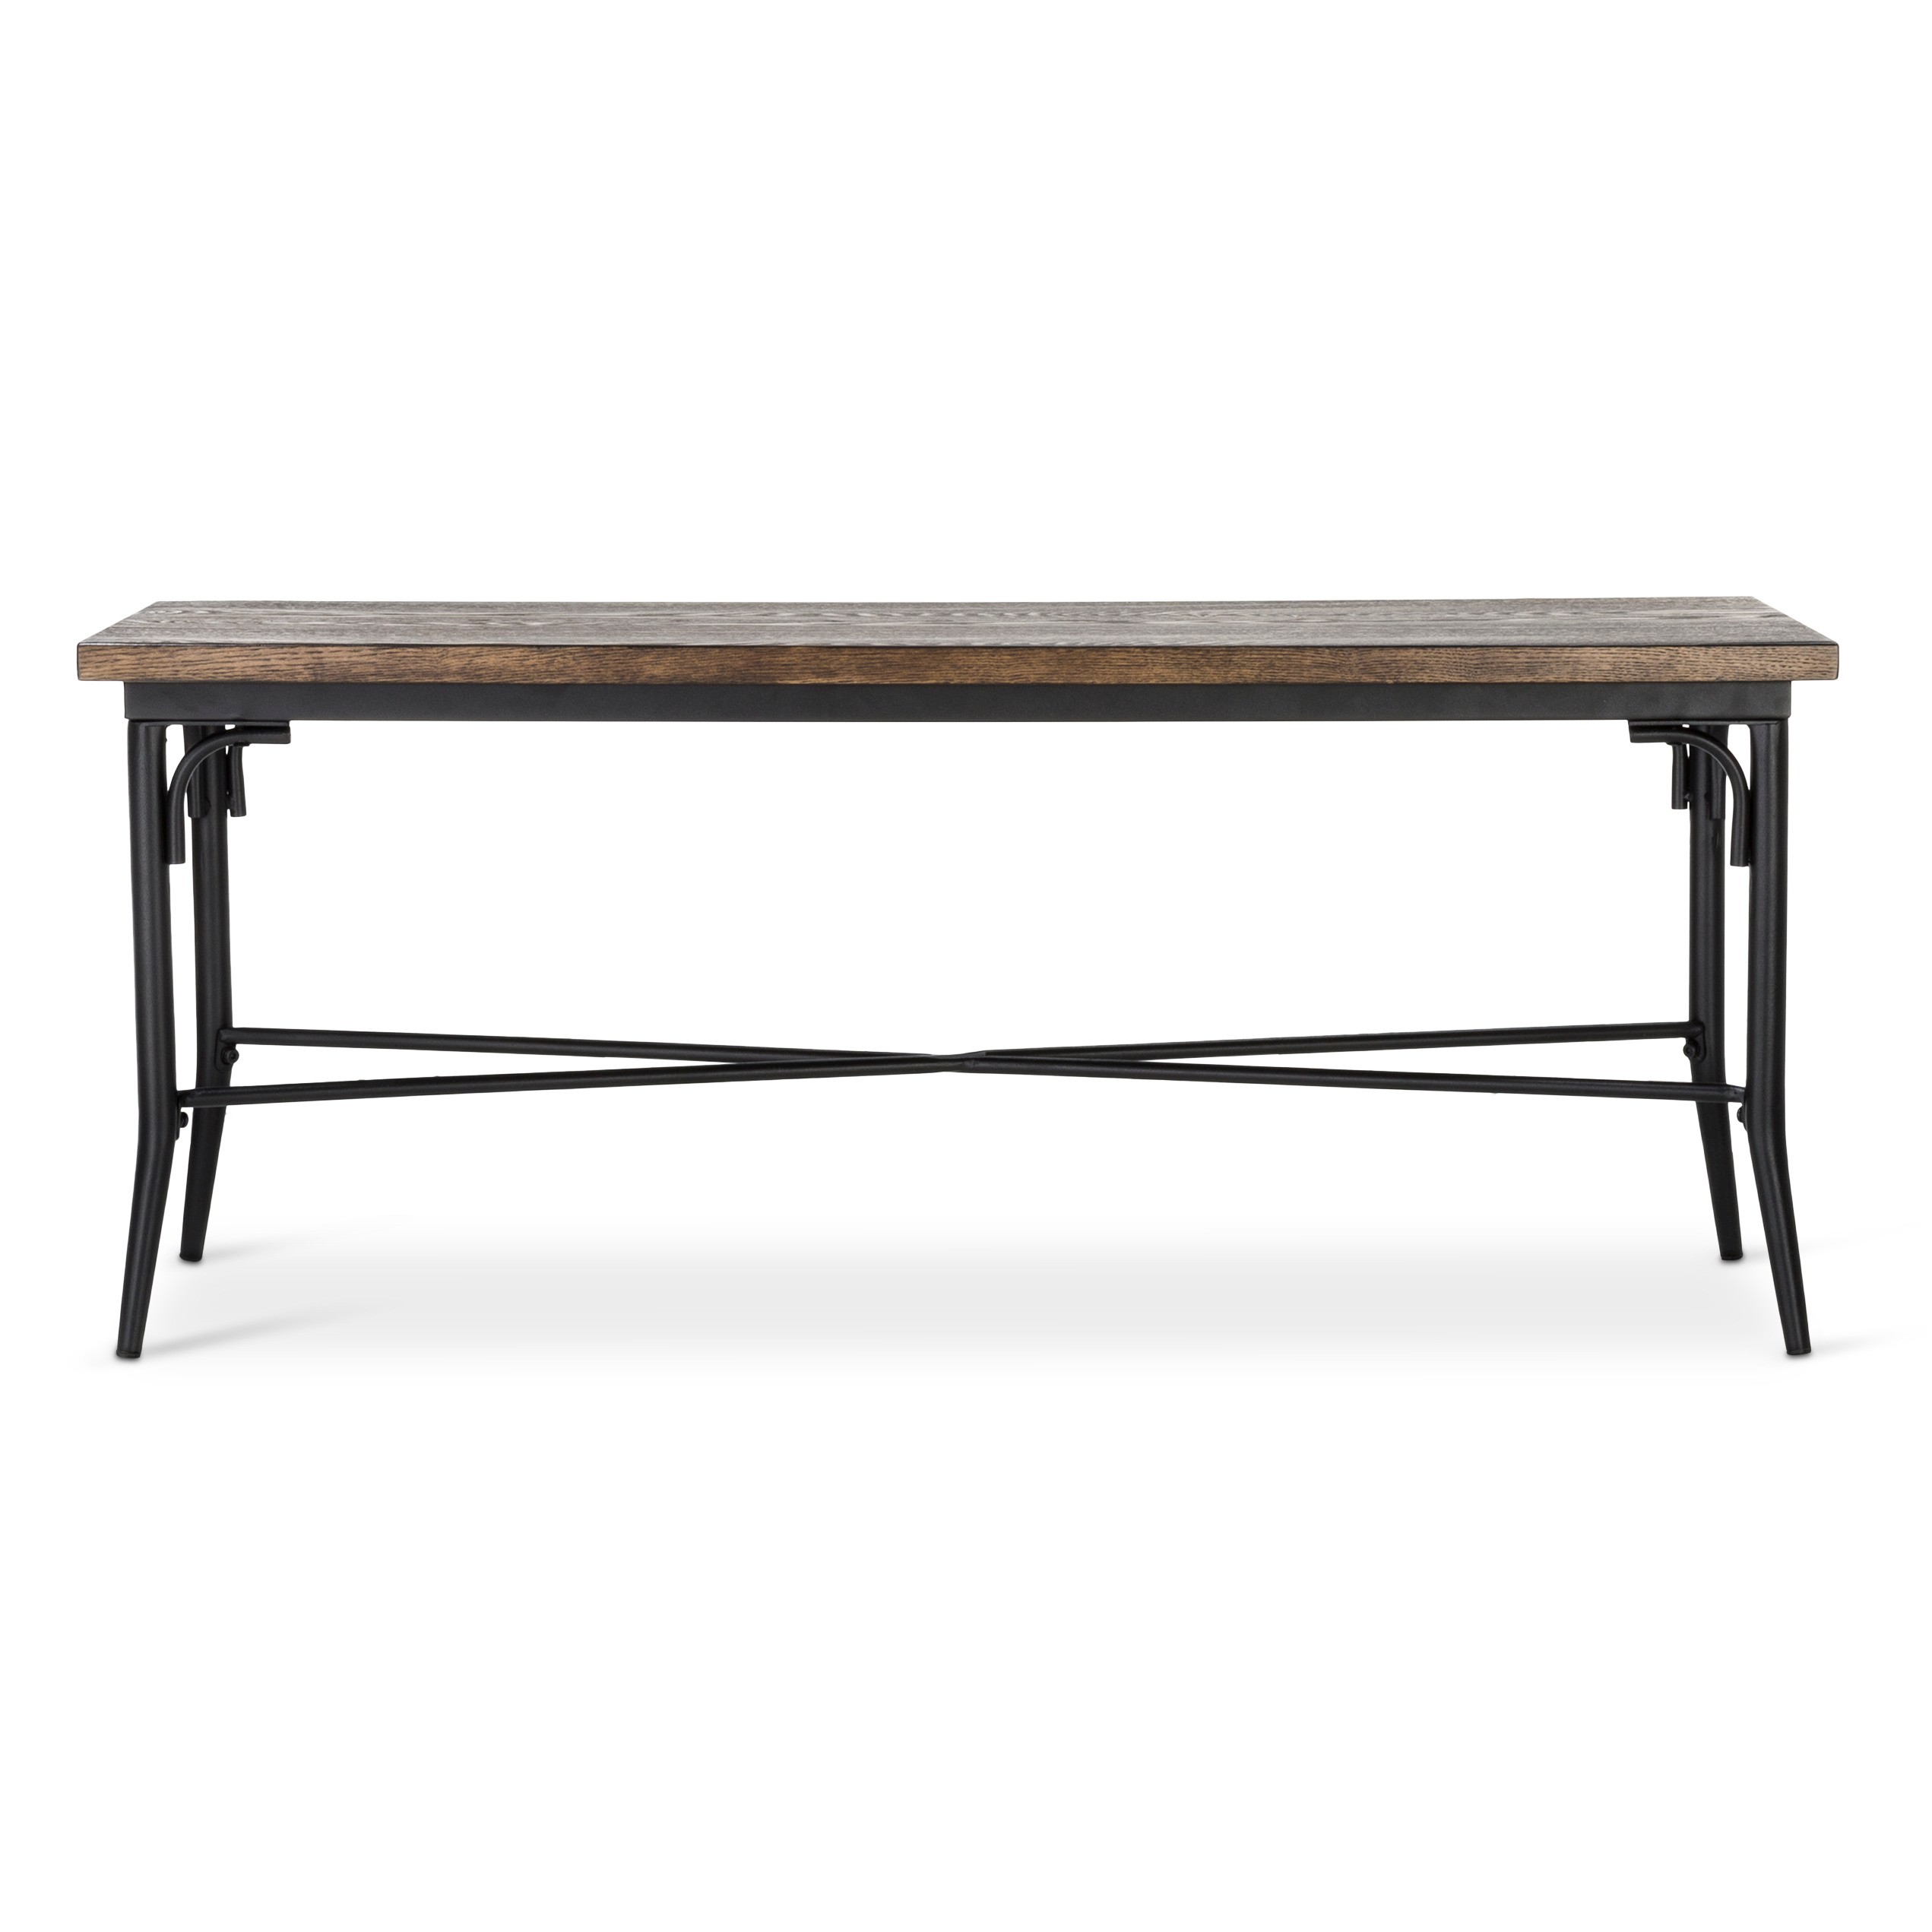 Bralton 43 | Dining bench, Metal beds and Wood planks